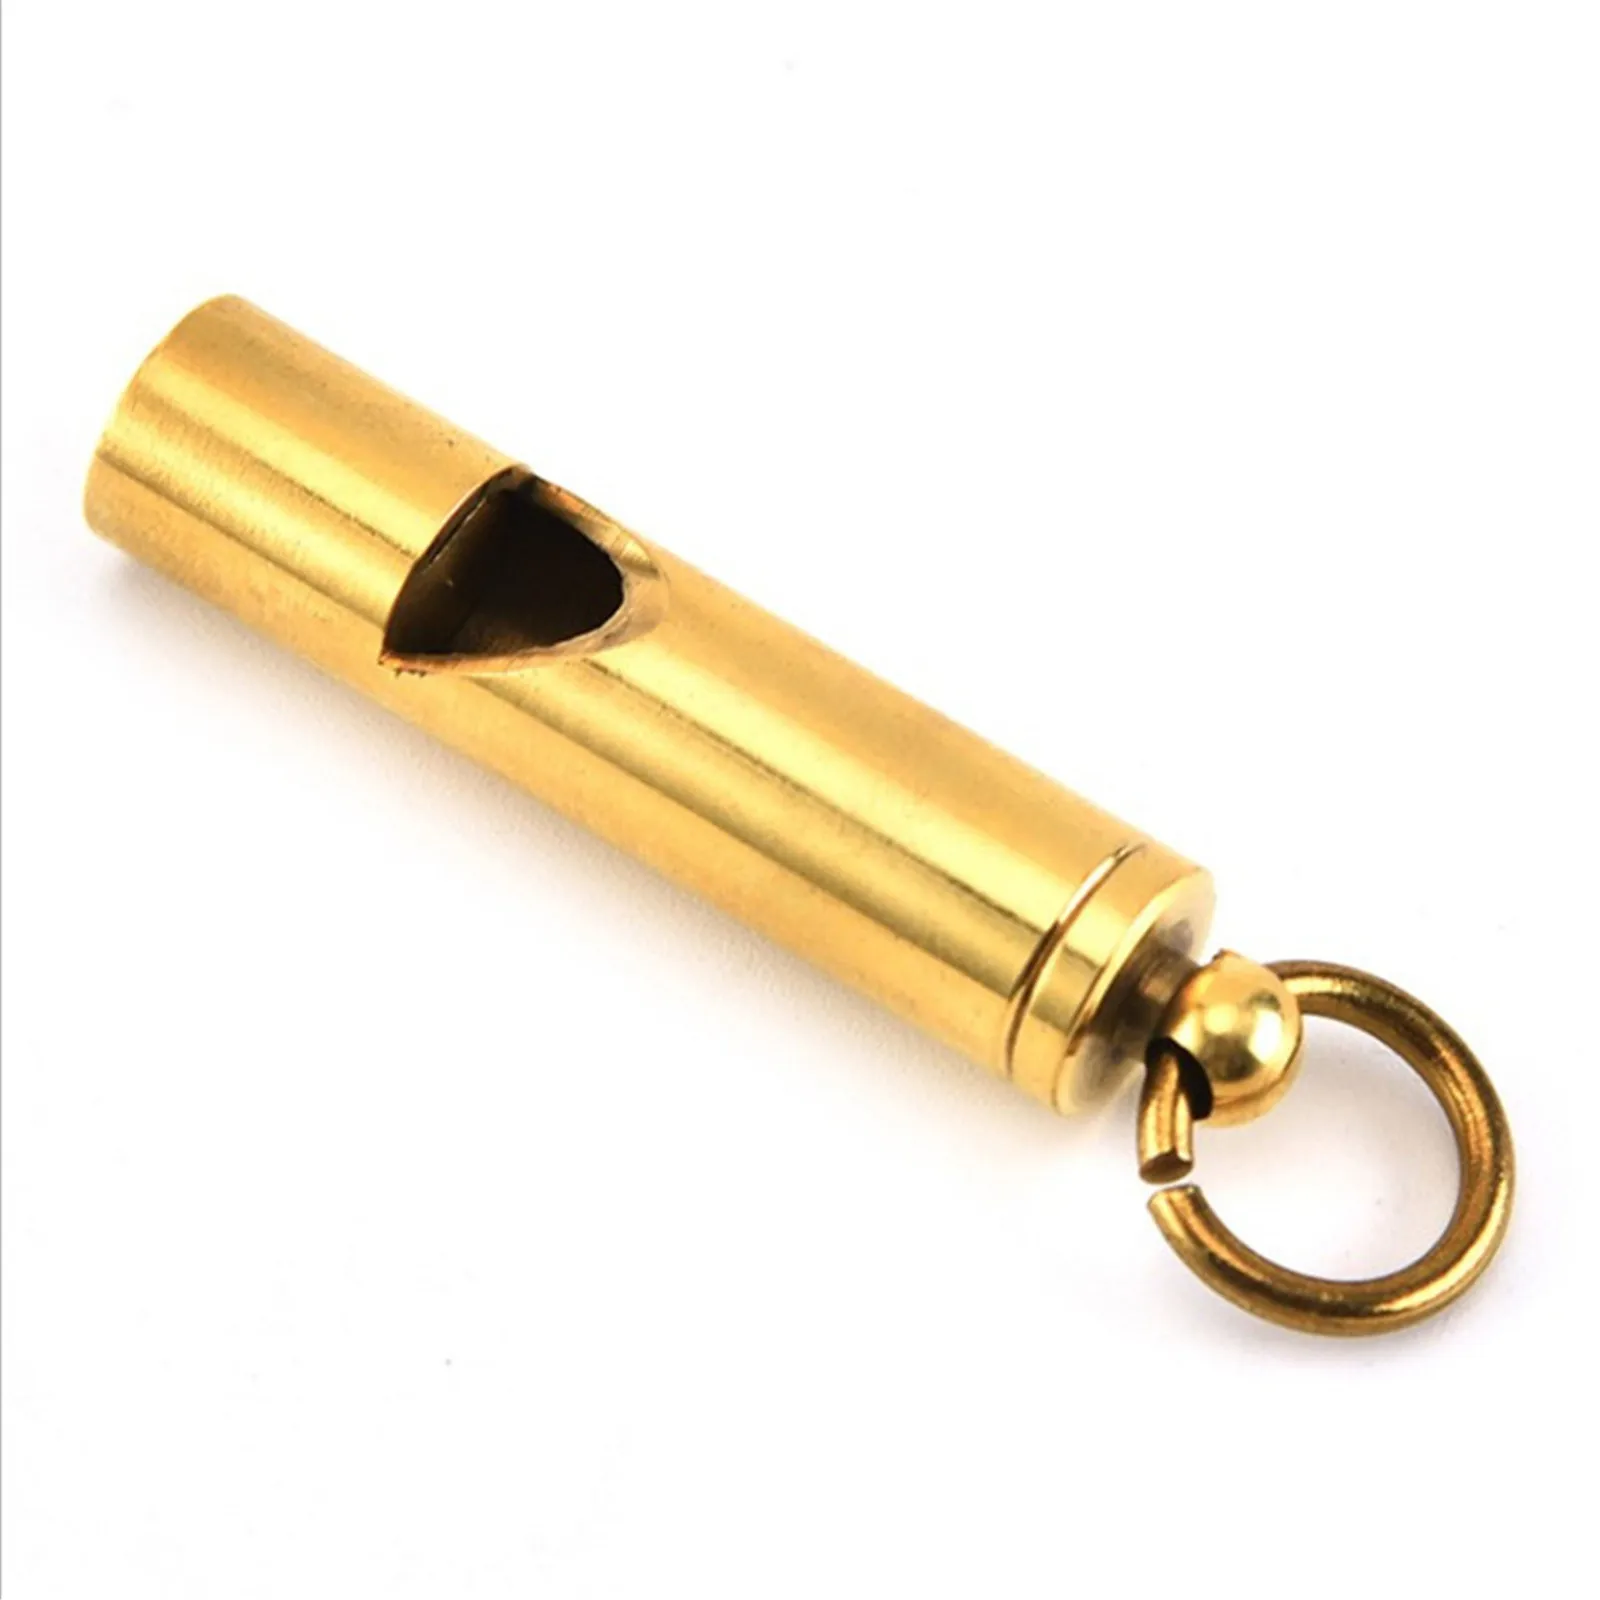 Solid Brass Whistle Emergency Whistles for Diving Camping Hiking Outdoor 